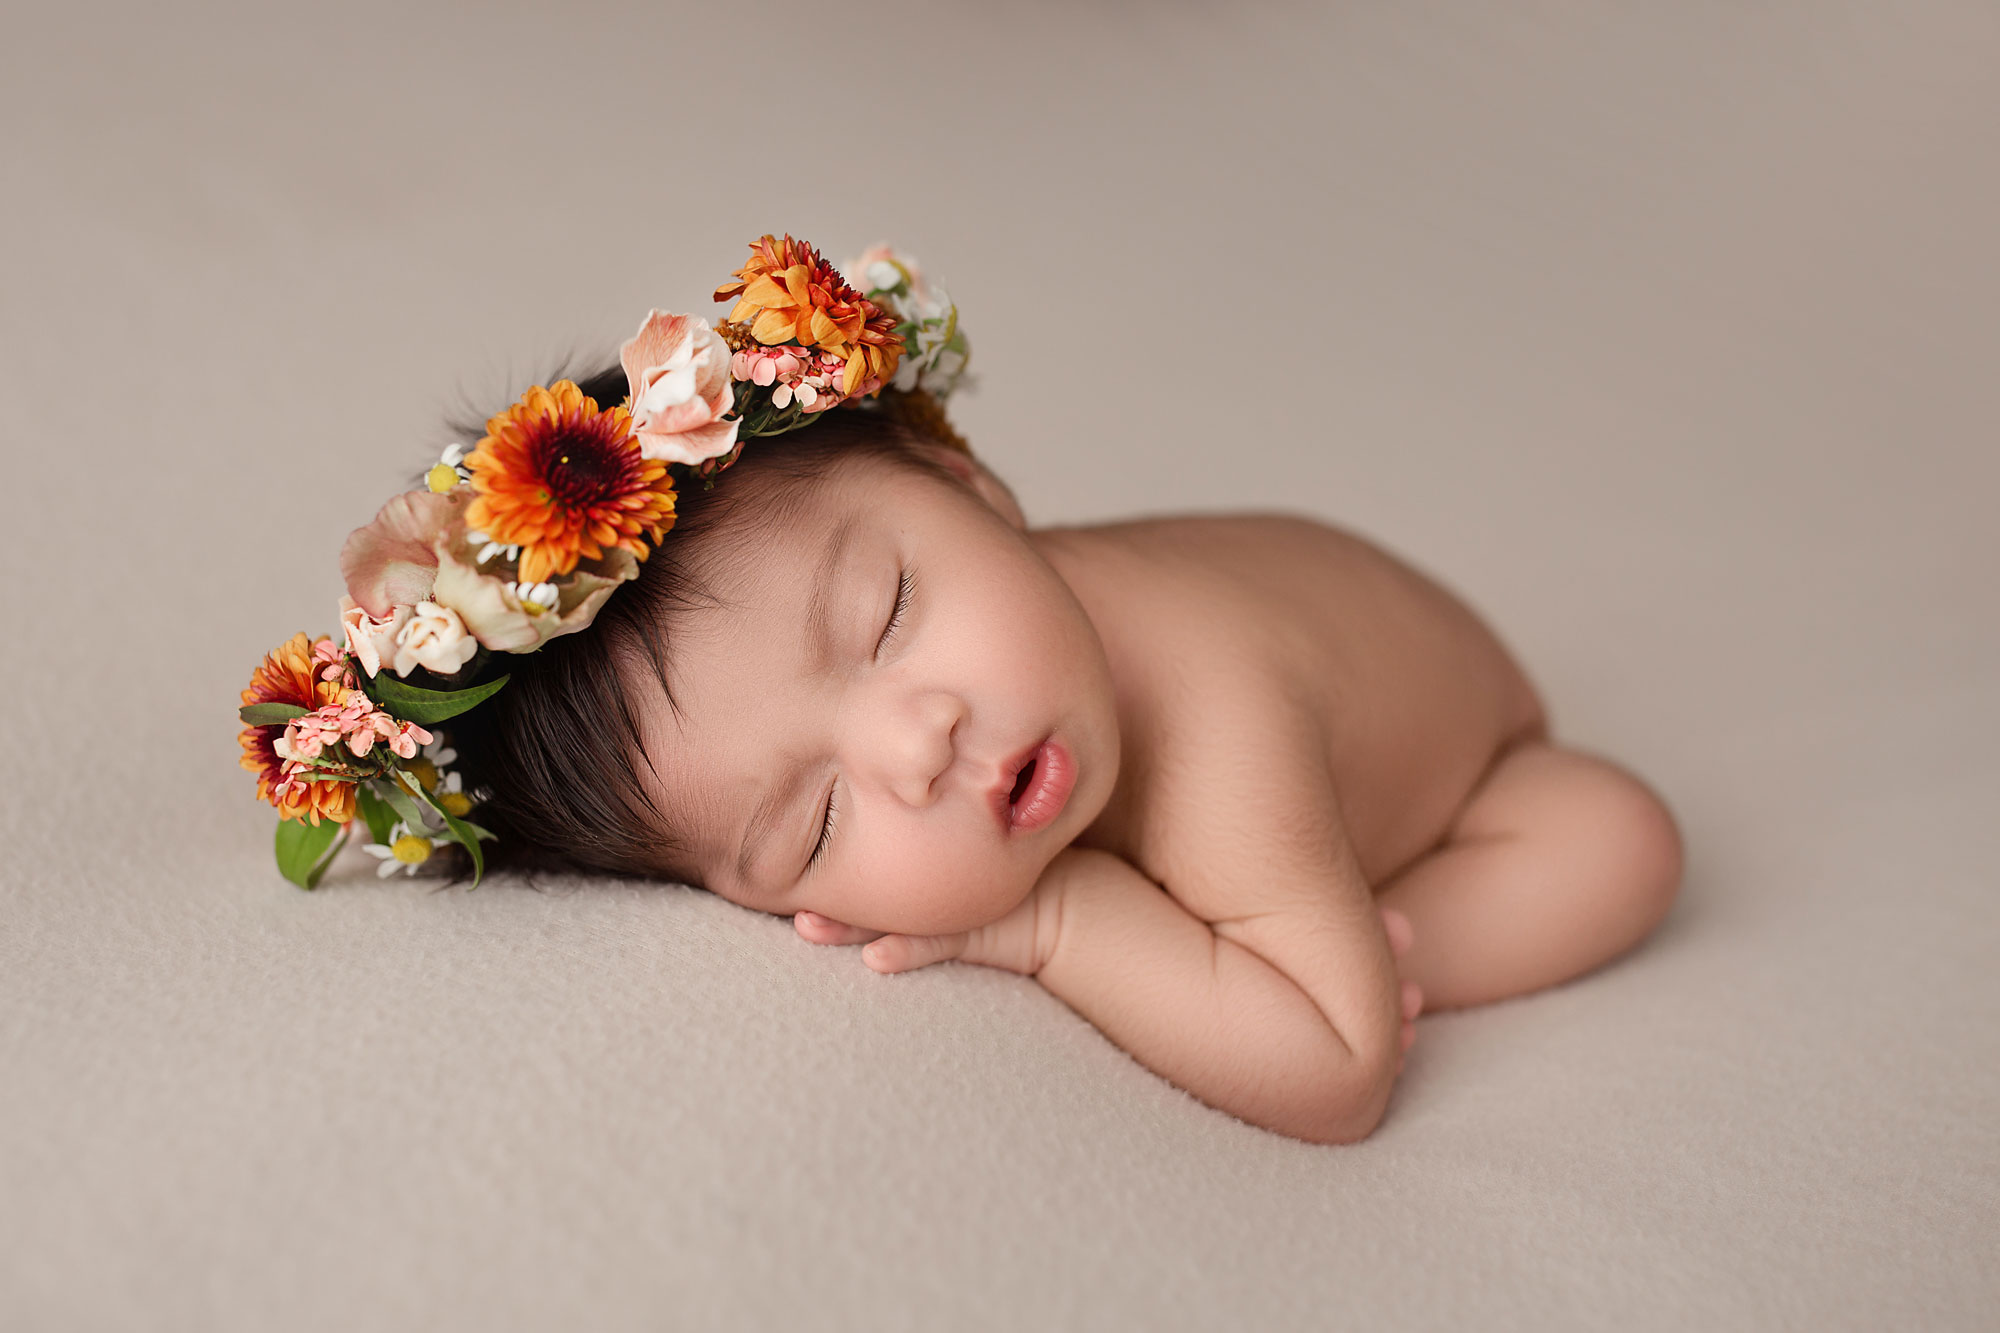 new jersey baby pictures, naked baby wearing flower crown